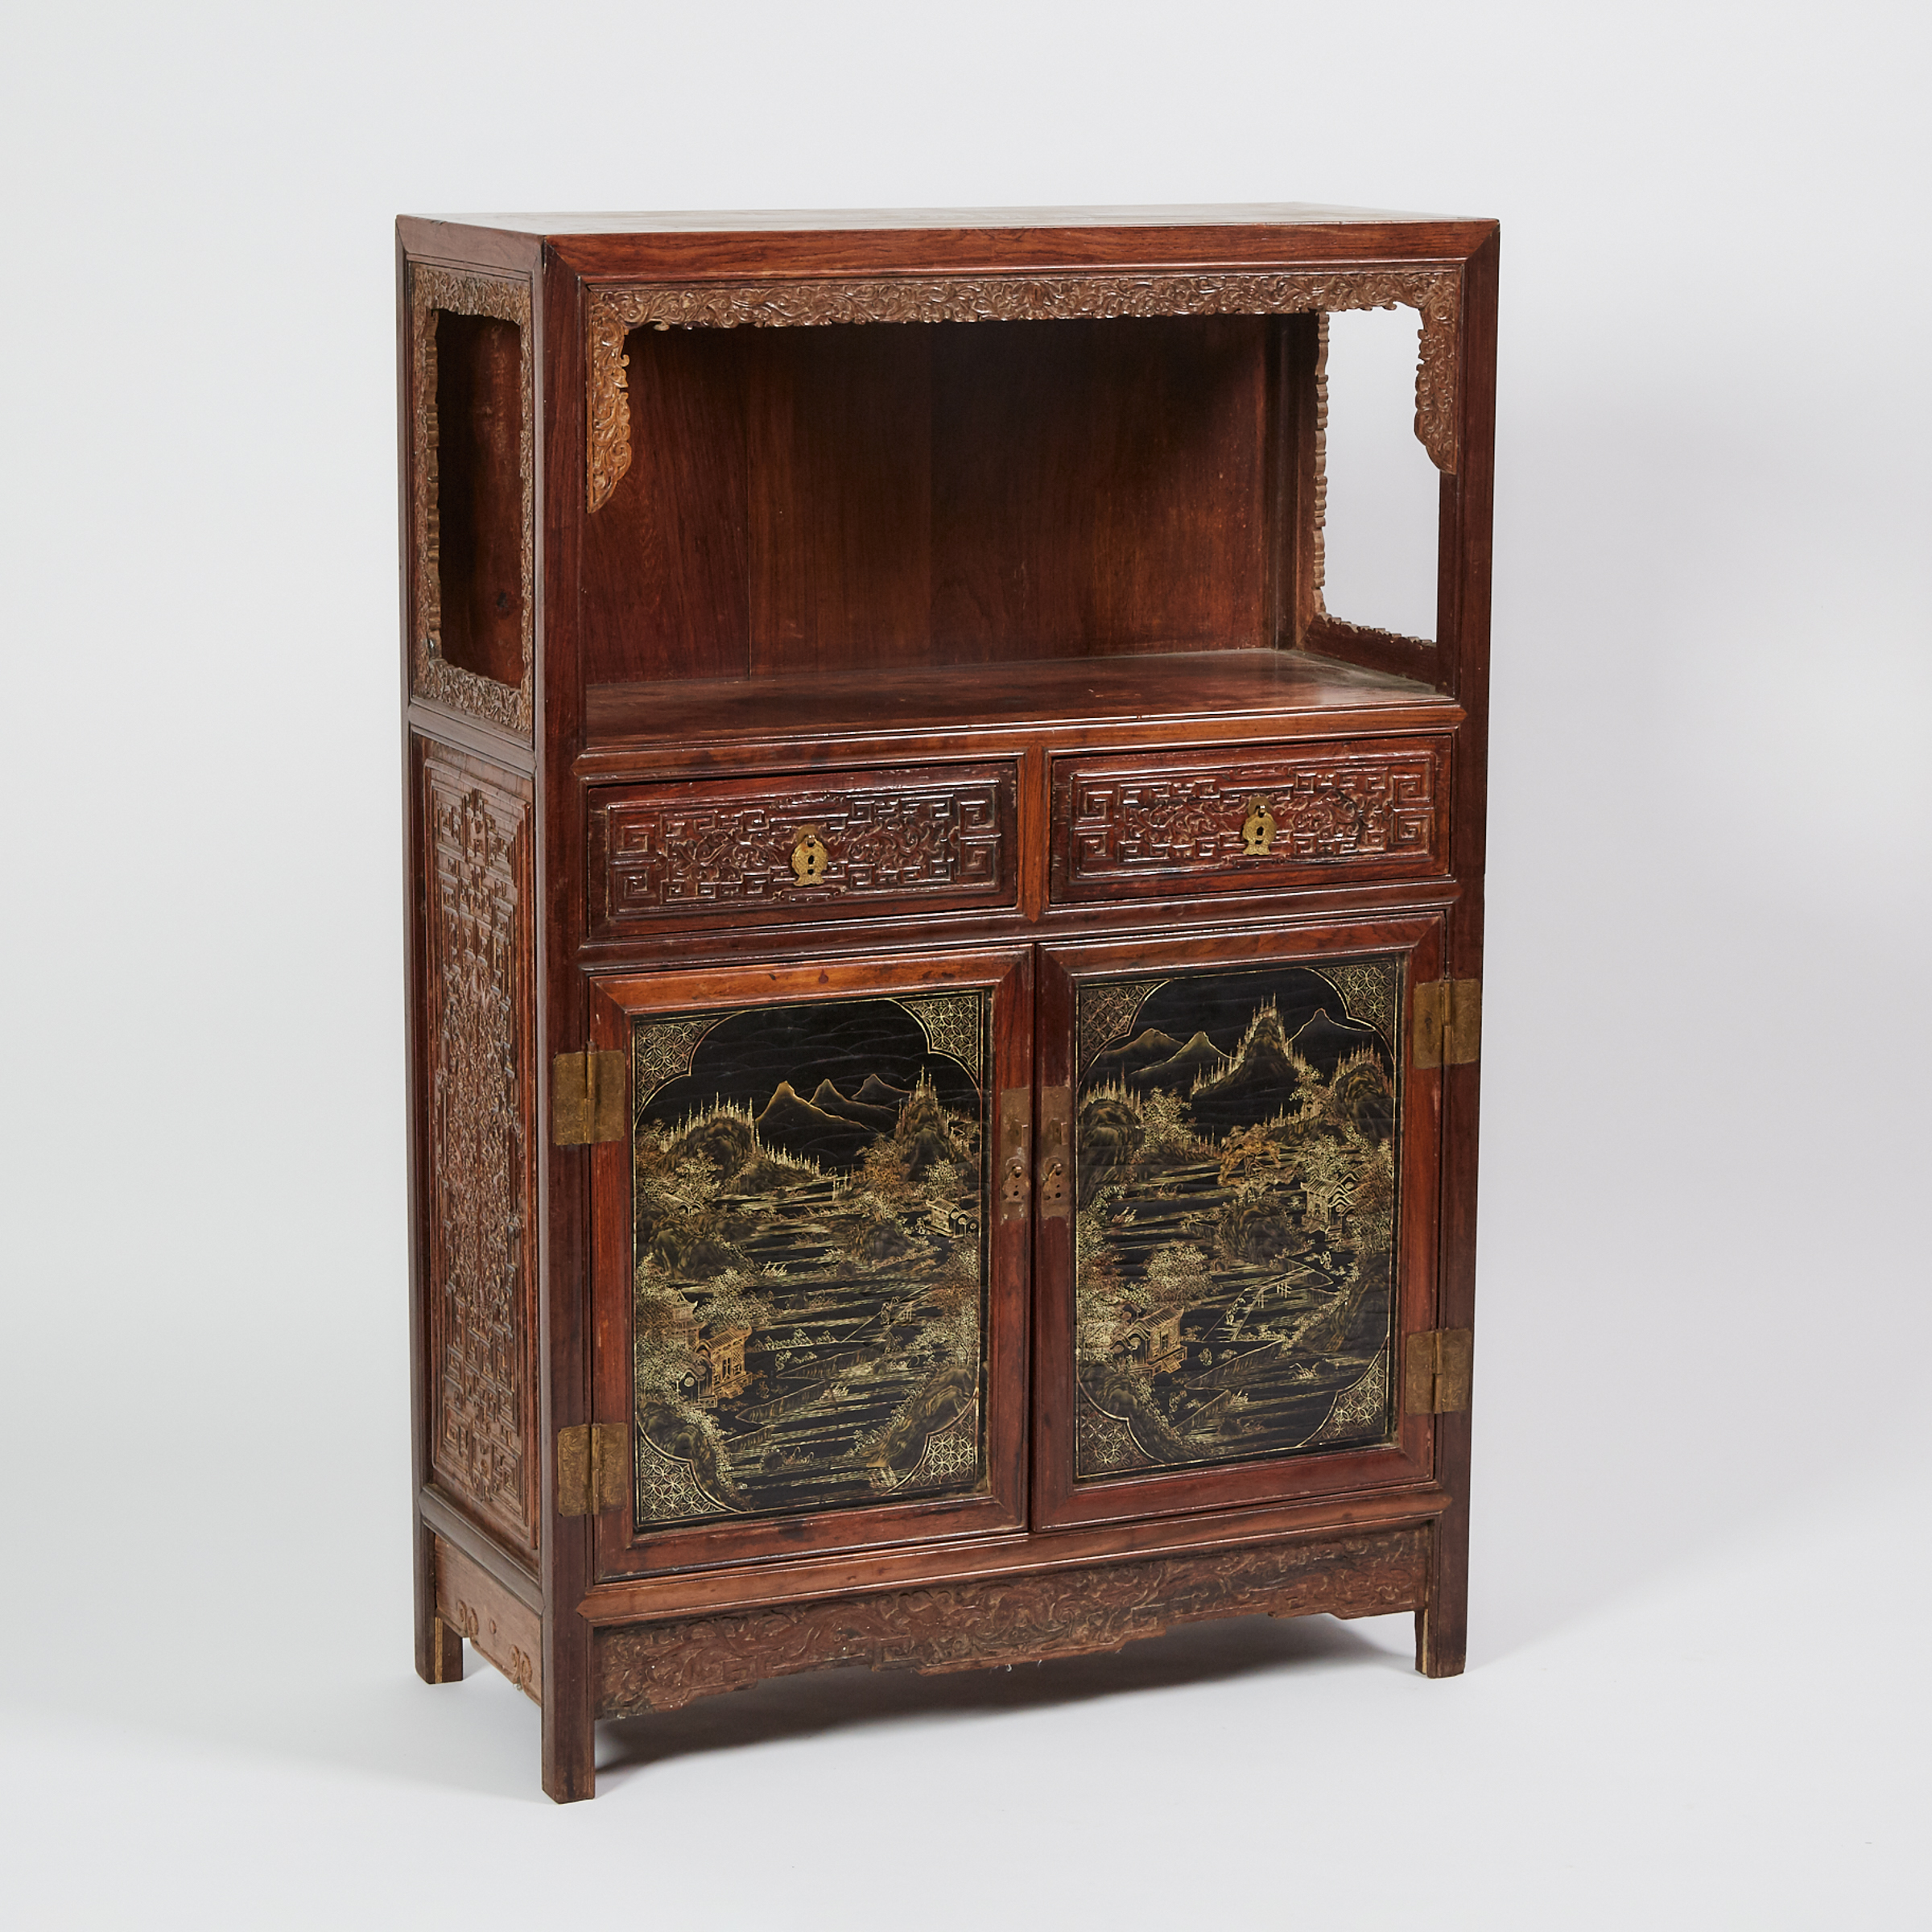 A Small Suanzhi Carved Display Cabinet